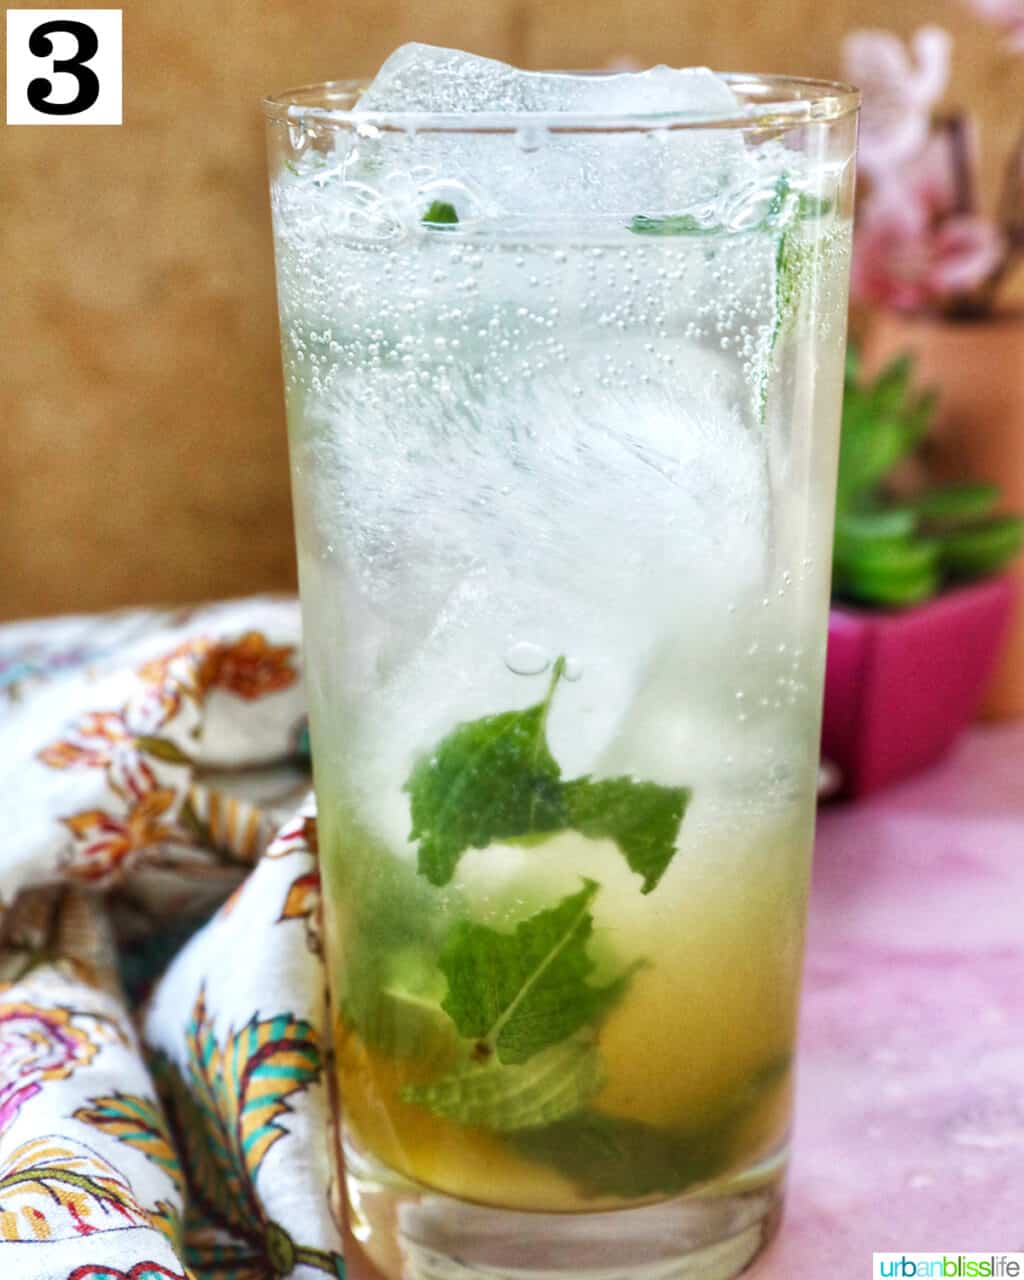 Mango mojito with mint leaves, ice cubes, and a lime slice garnish.